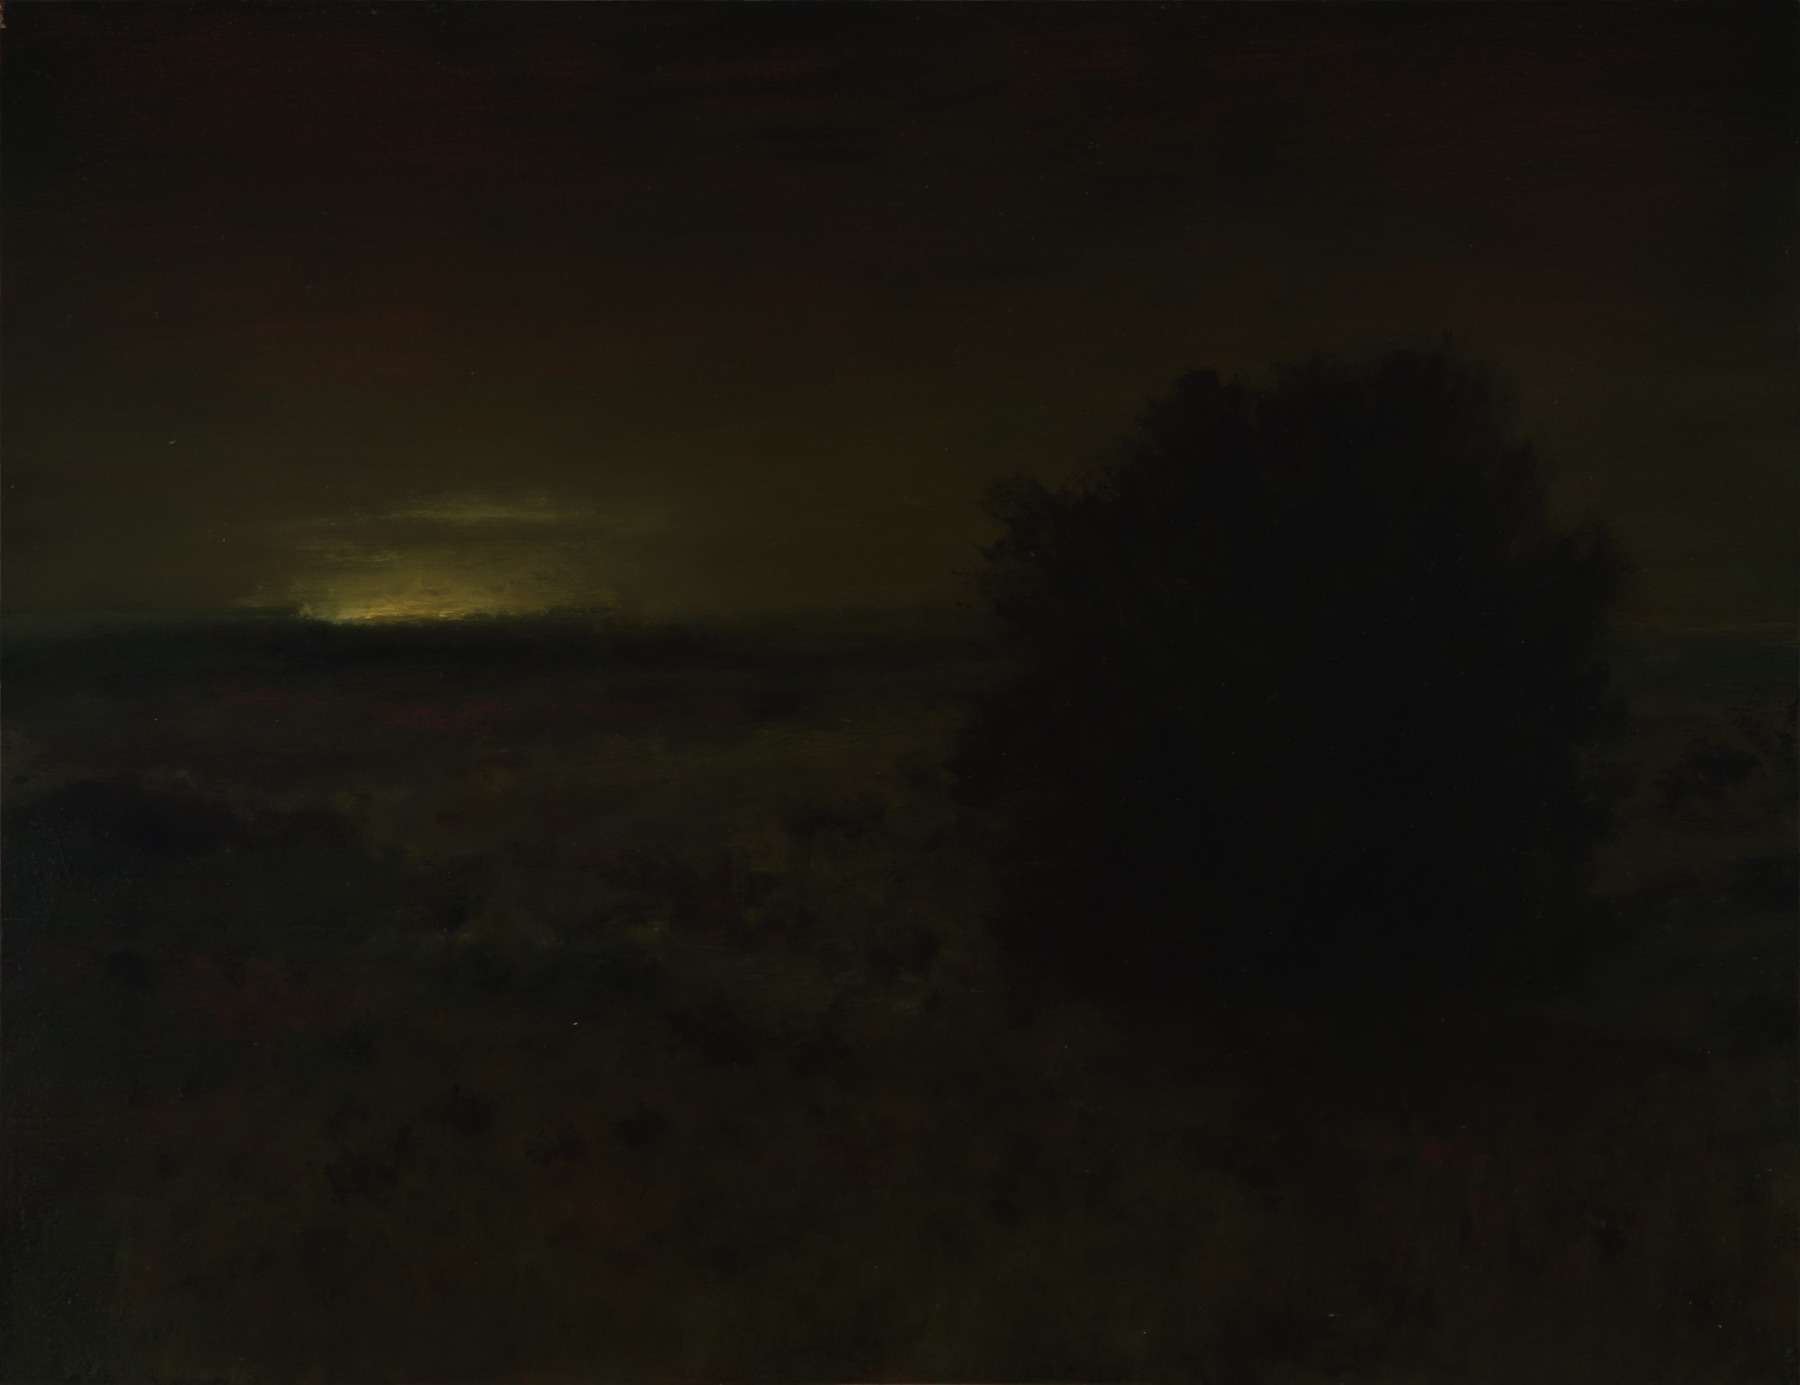 Chris Peters, Chapparal at Night